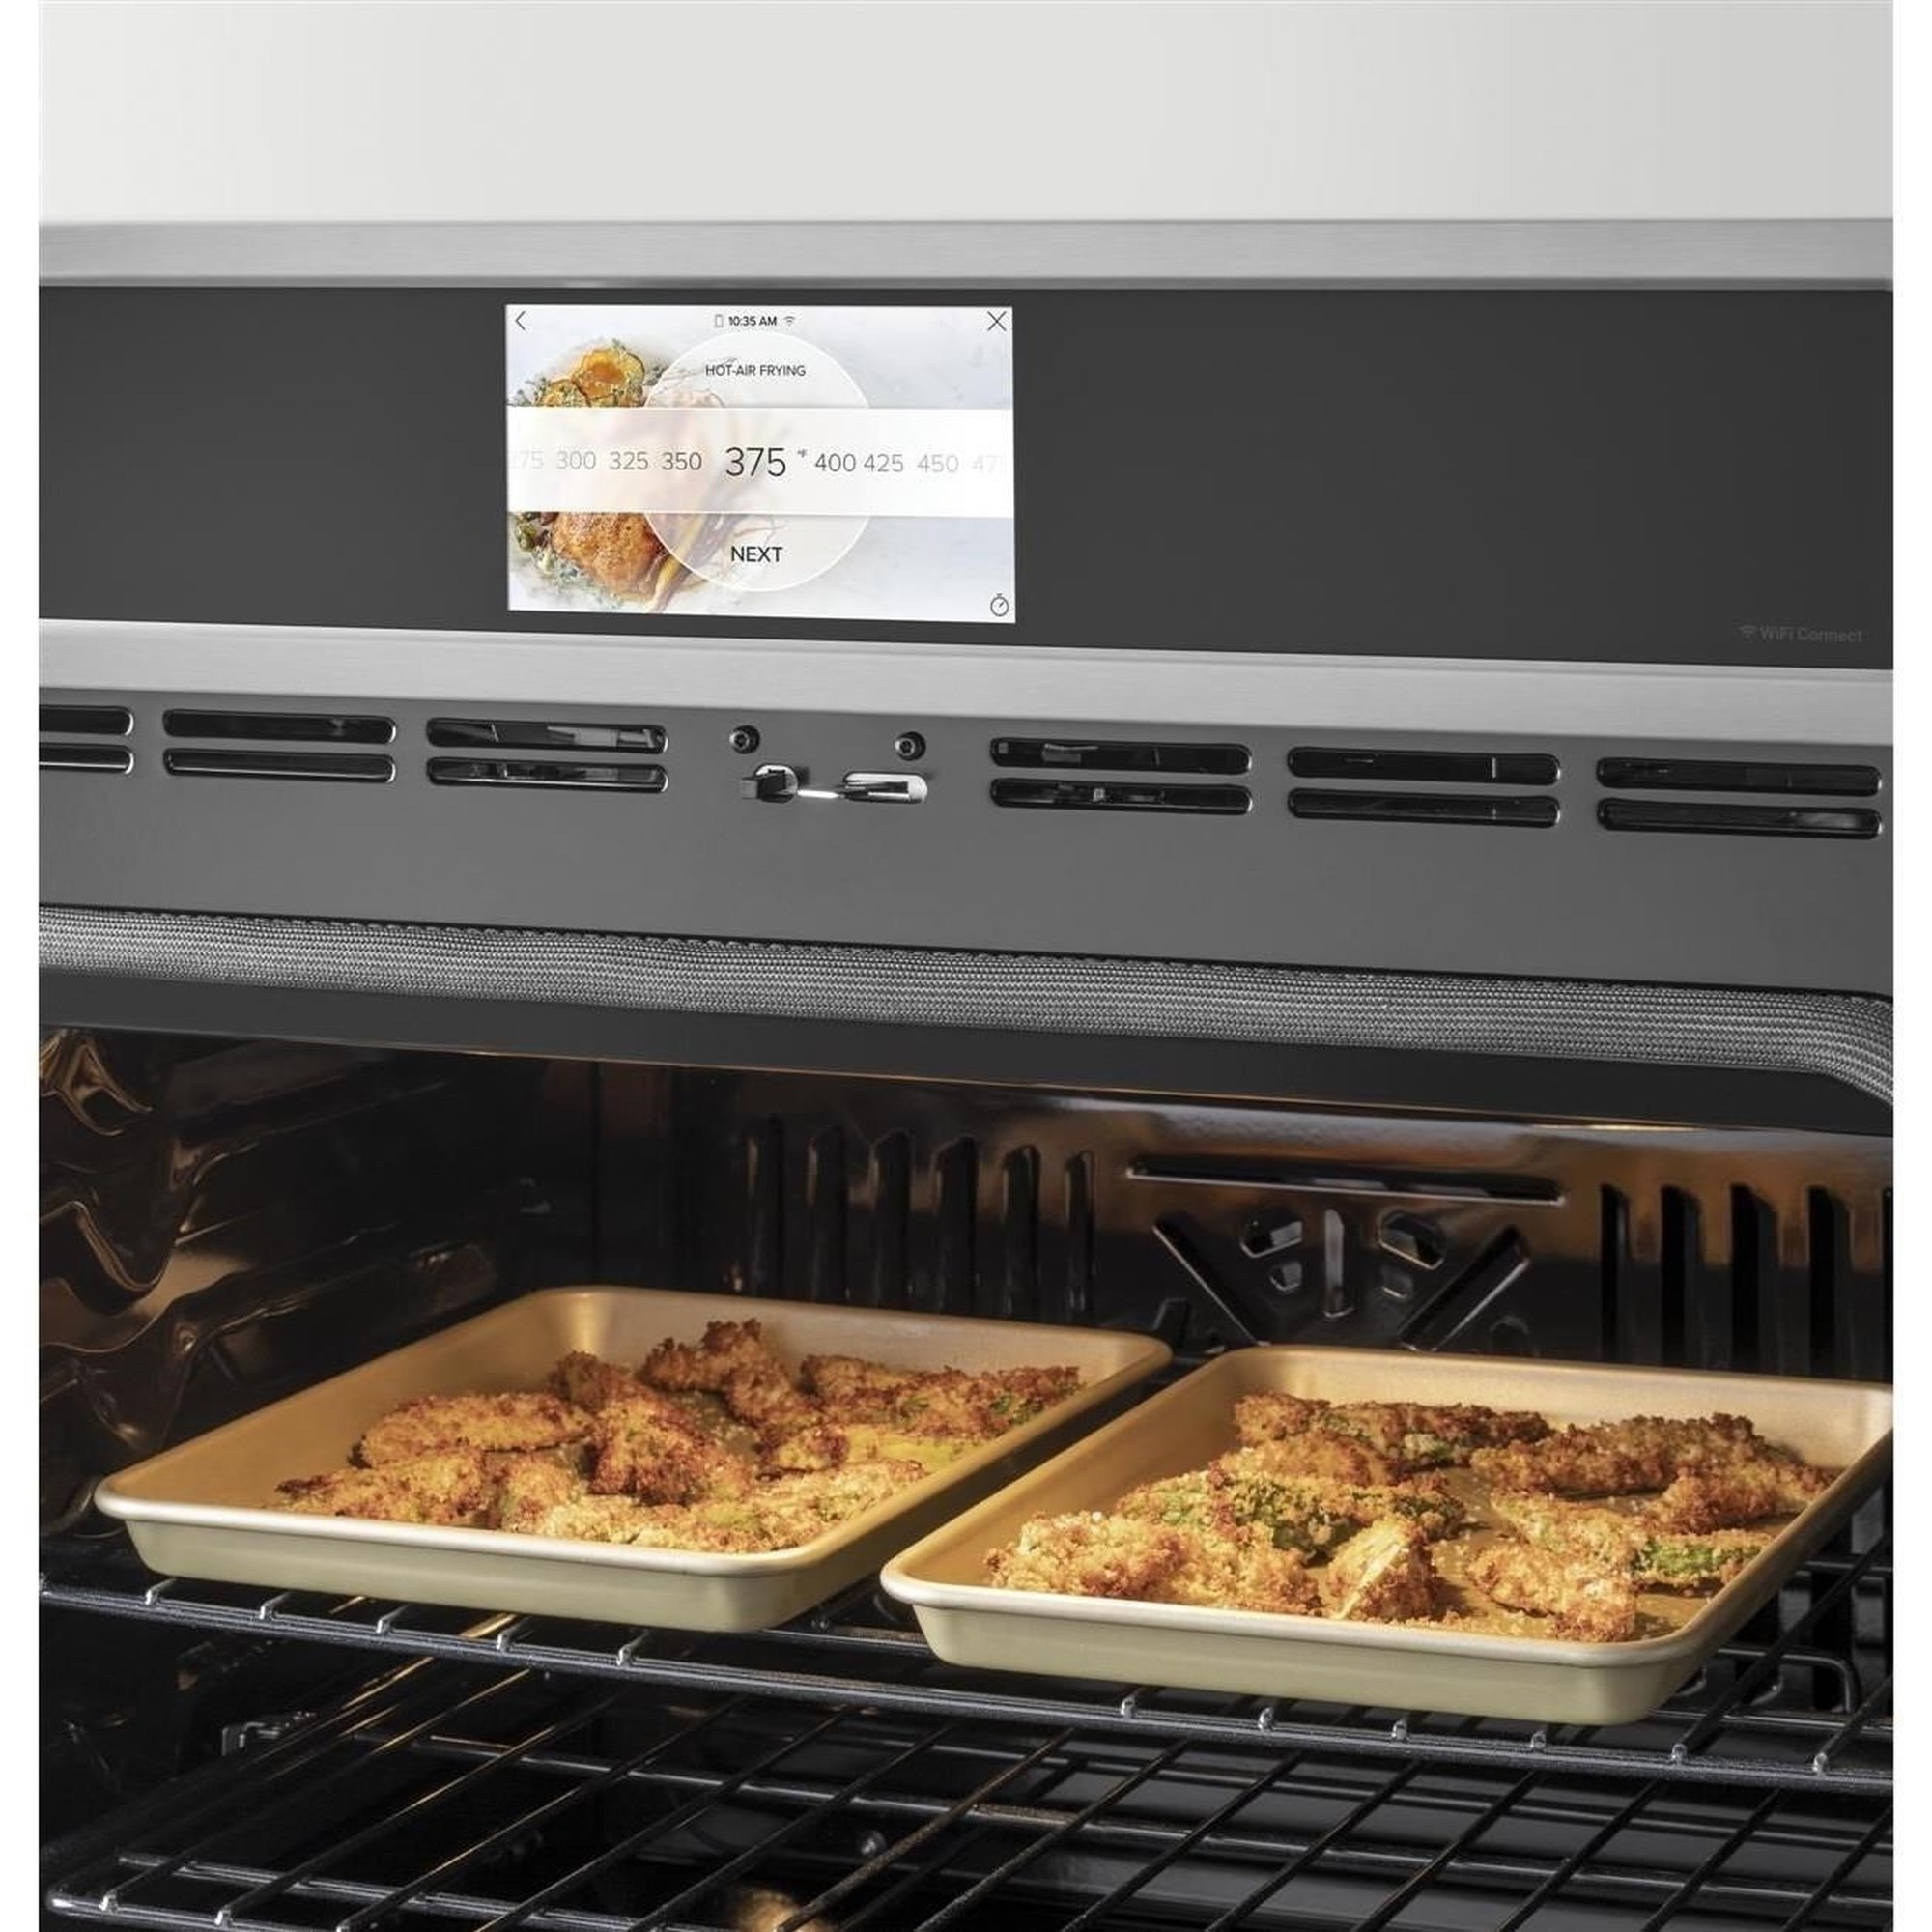 https://imageresizer4.furnituredealer.net/img/remote/images.furnituredealer.net/img/products%2Fge_appliances%2Fcolor%2Fge%20electric%20wall%20ovens%20-%202015_ctd90fp4nw2-b5.jpg?width=2000&height=2000&scale=both